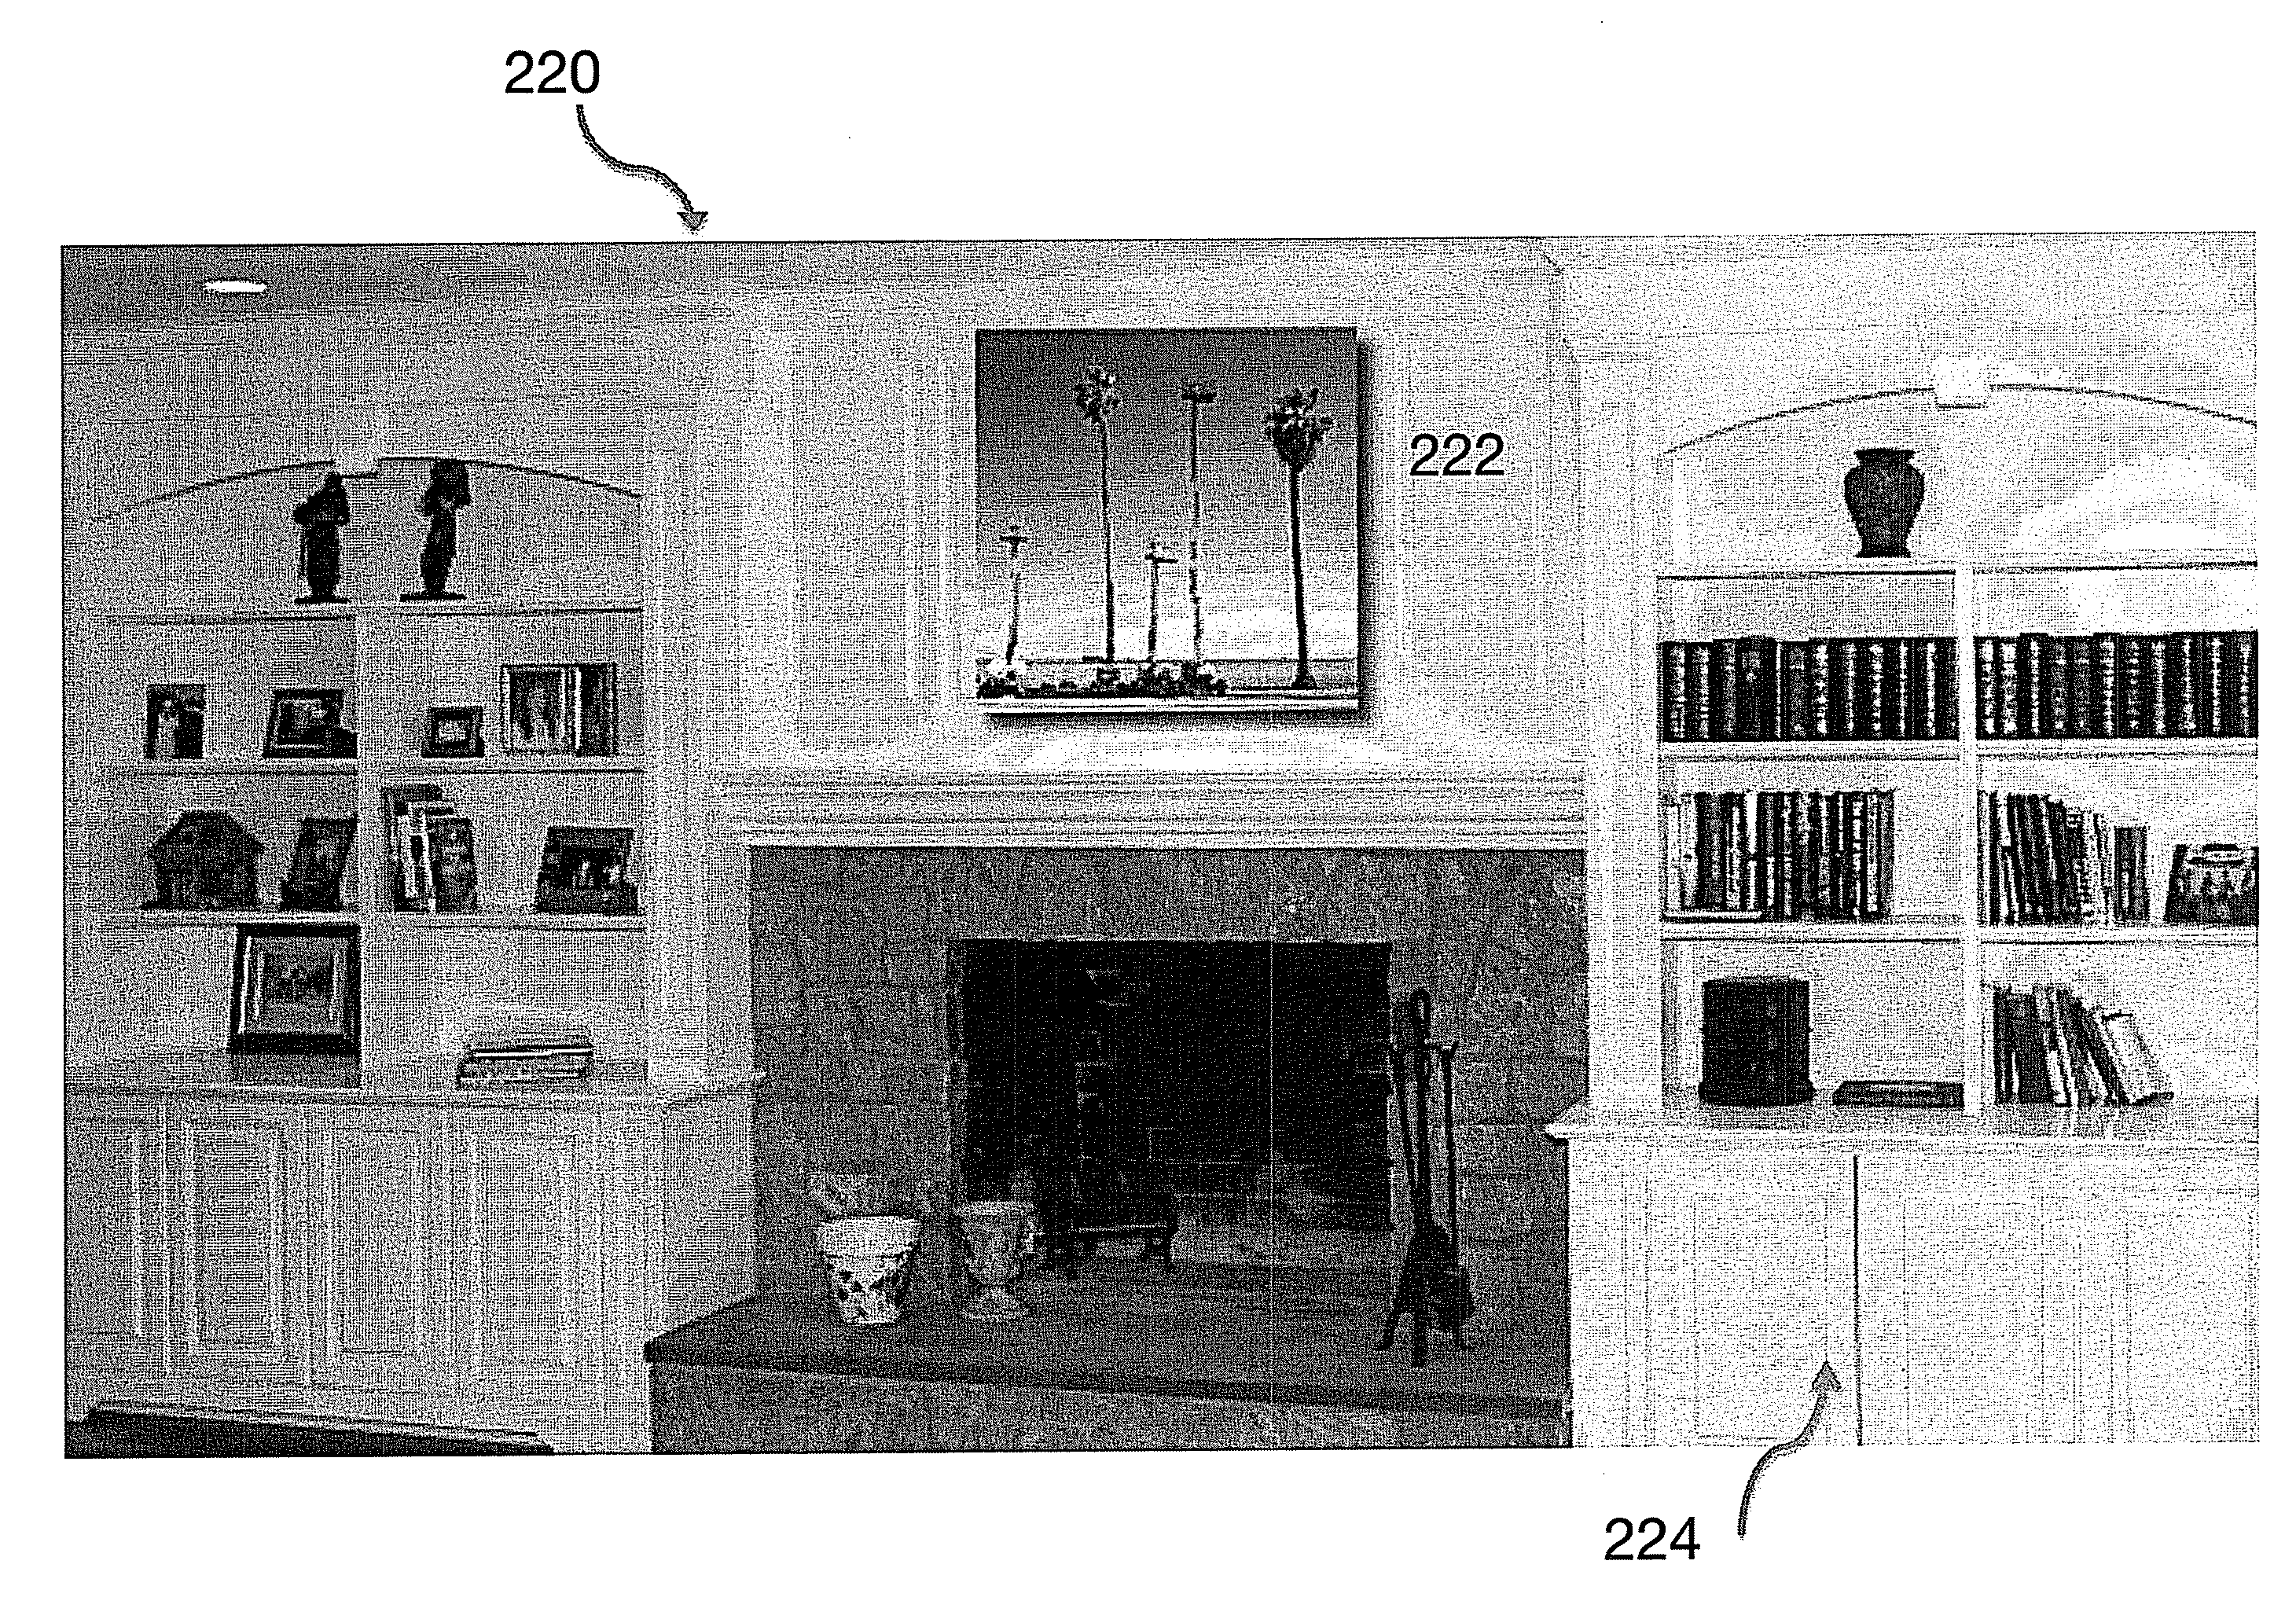 System and process for virtually decorating a room or area